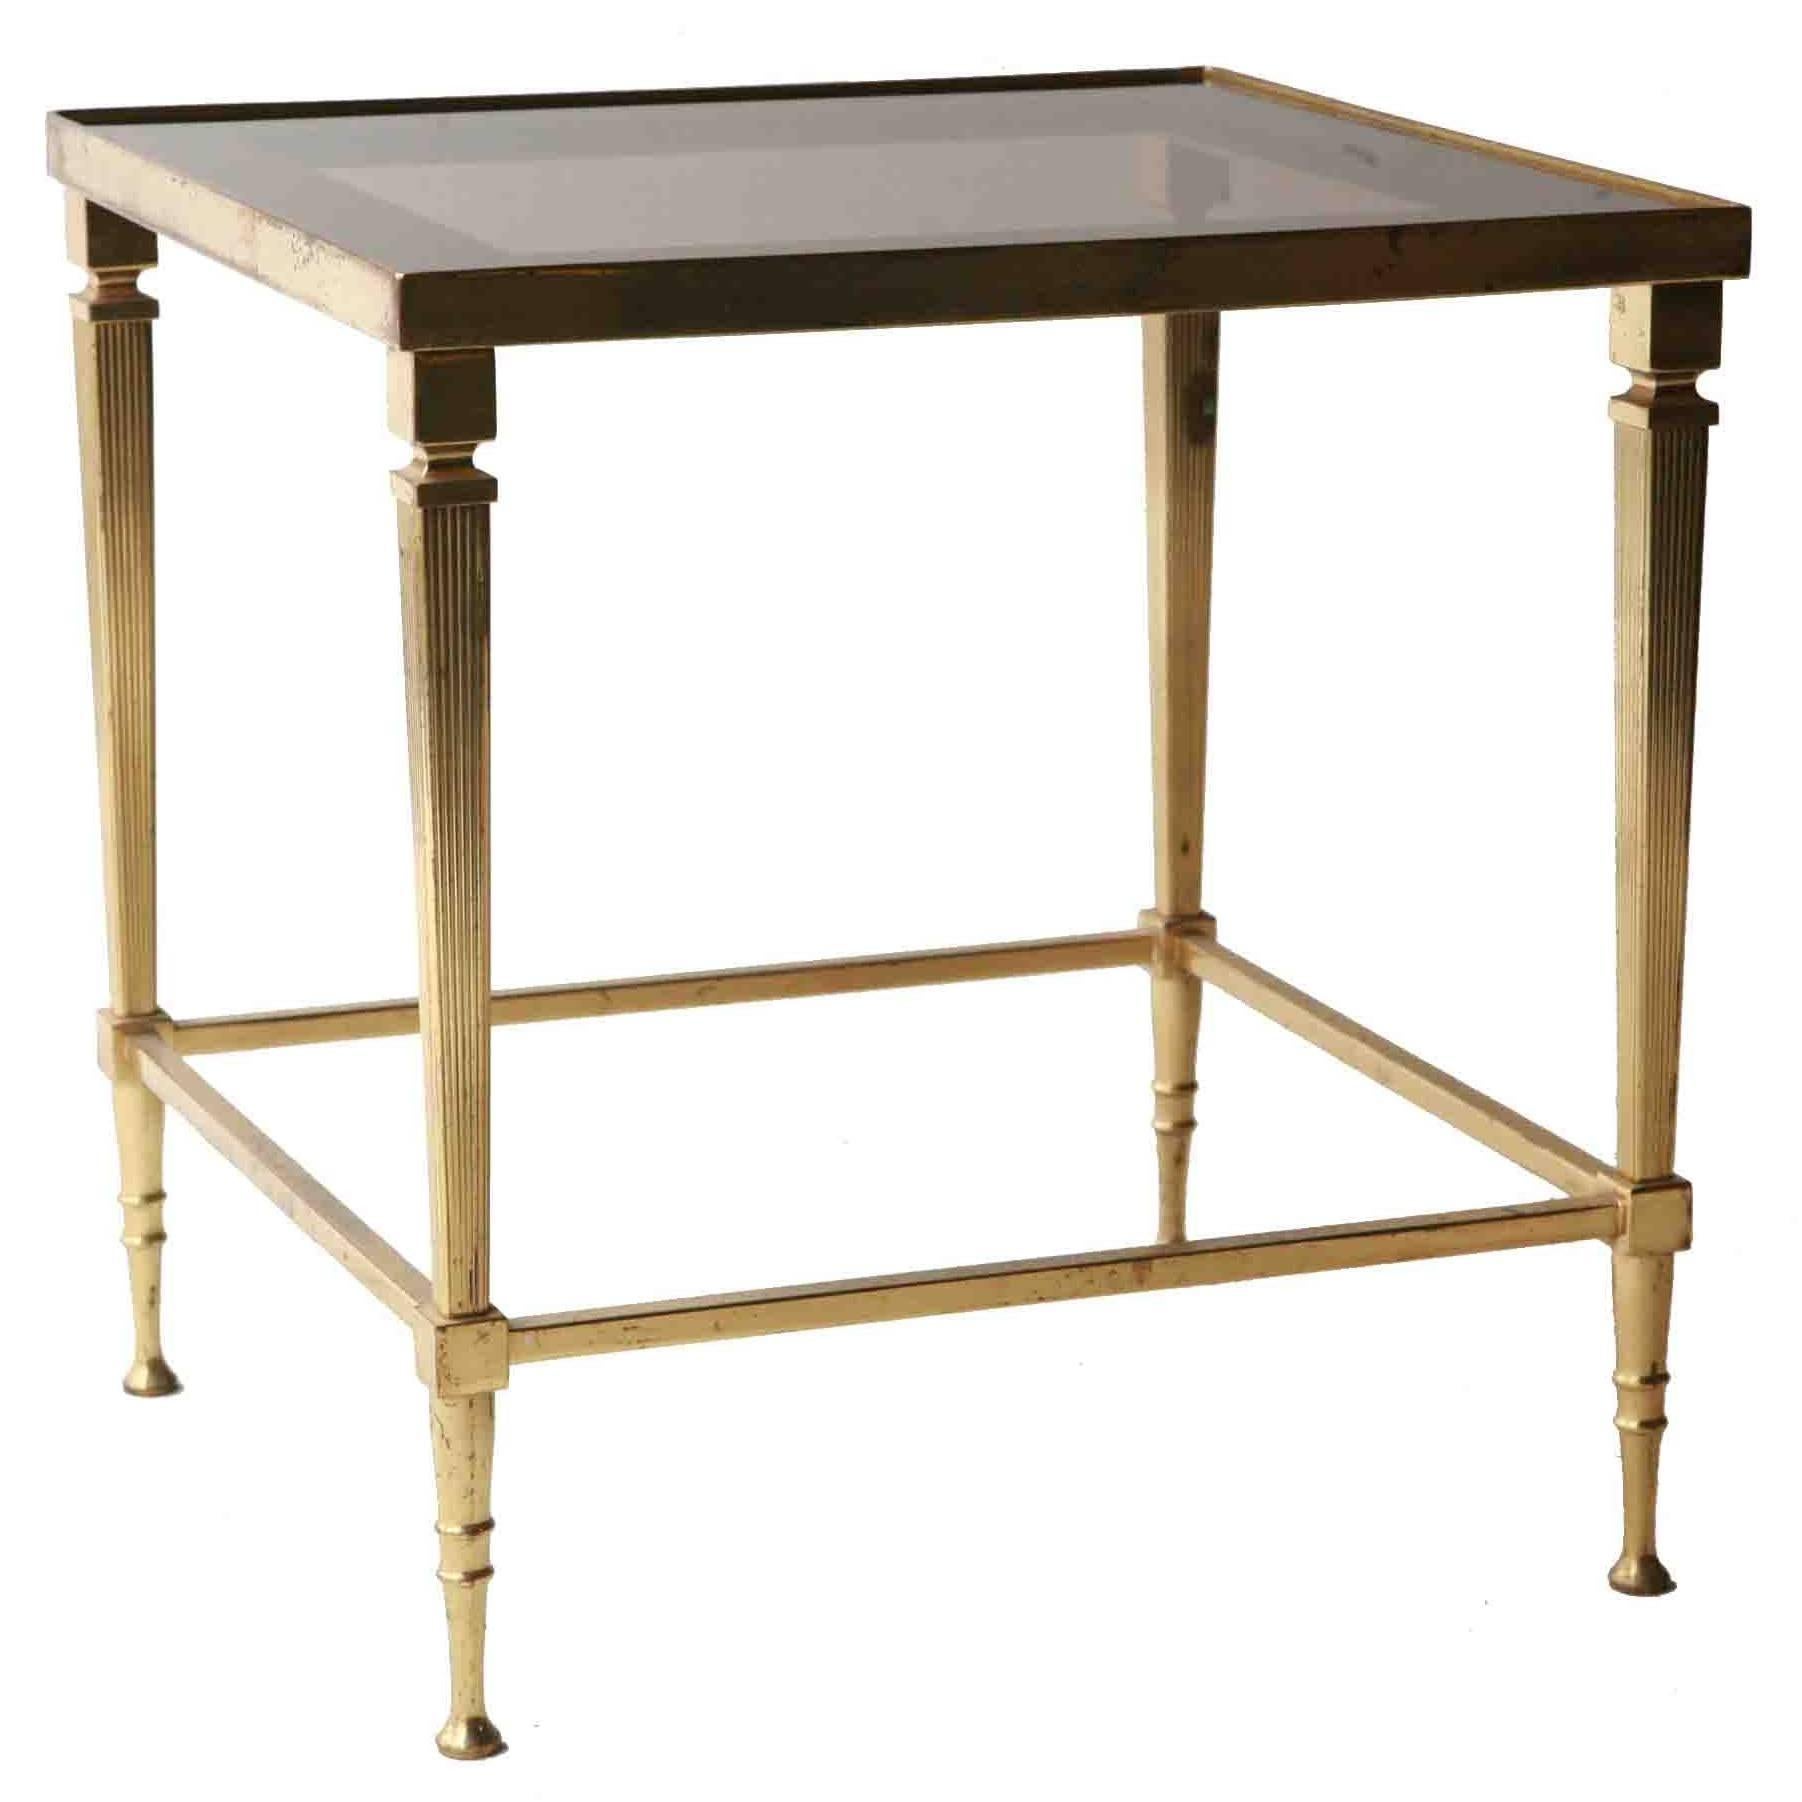 Maison Jansen Midcentury Modern Square Bronze Glass Gold French Side Table, 1960